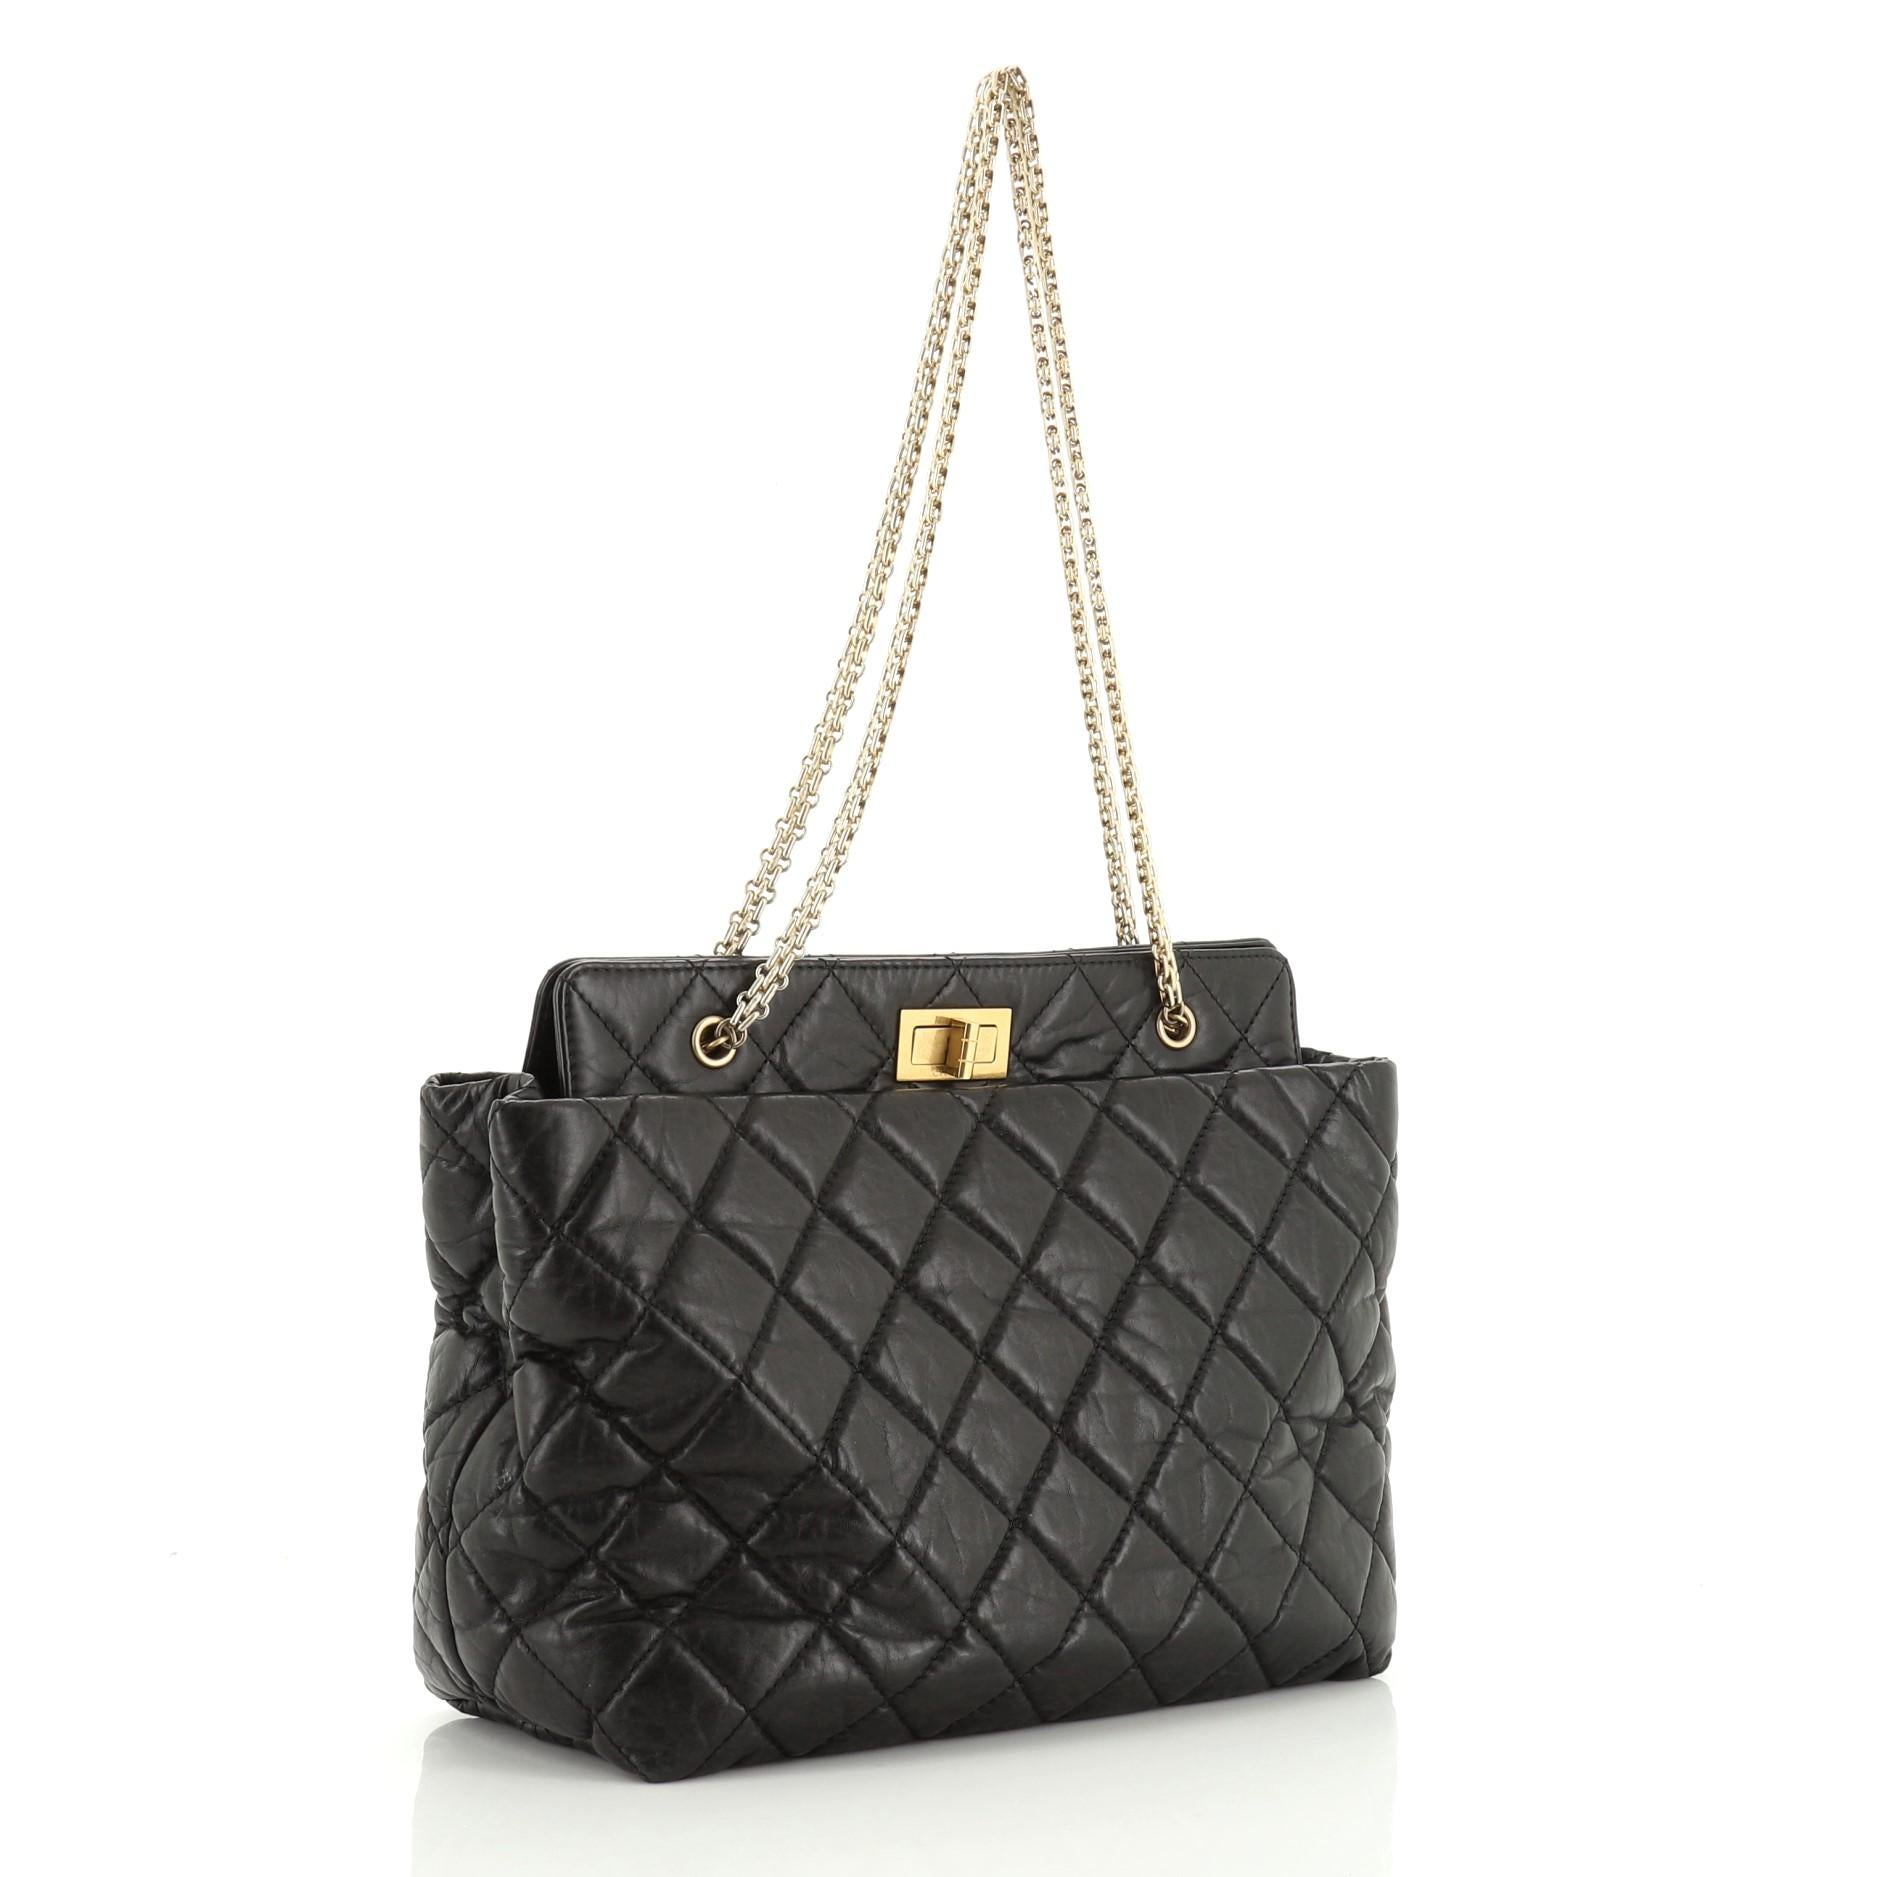 Black Chanel Reissue Tote Quilted Aged Calfskin Medium,